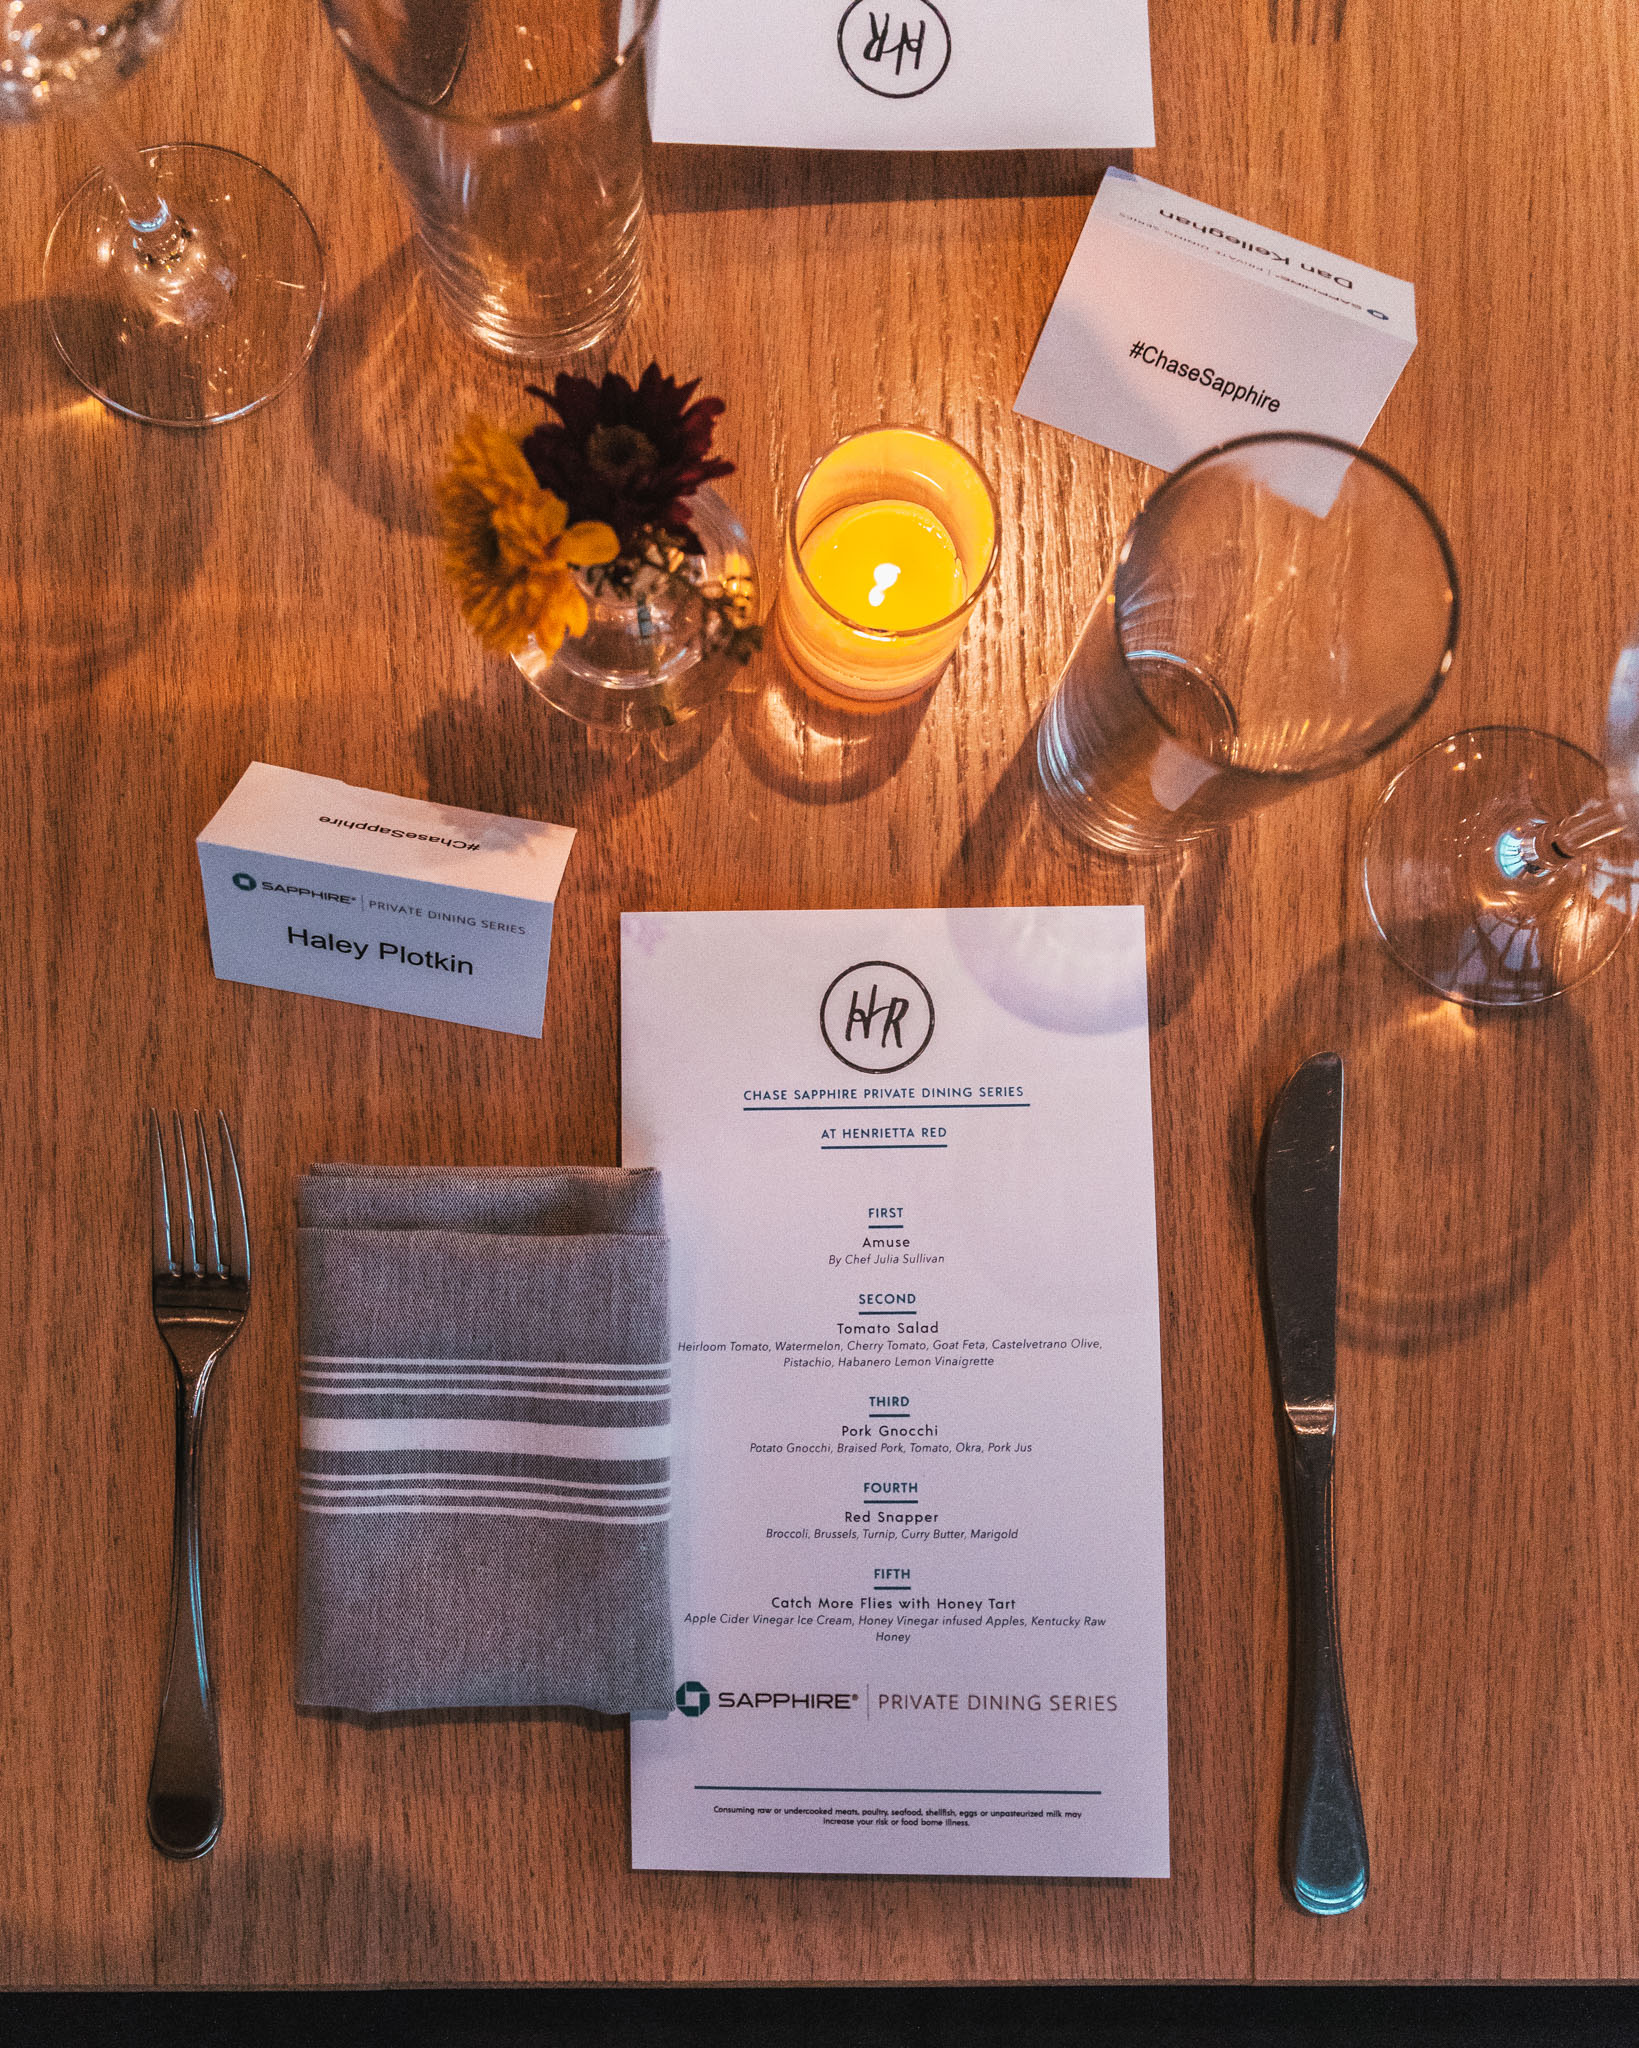 Chase Sapphire Private Dining Series at Henrietta Red // A Weekend at Hotel Thrillist #readysetjetset